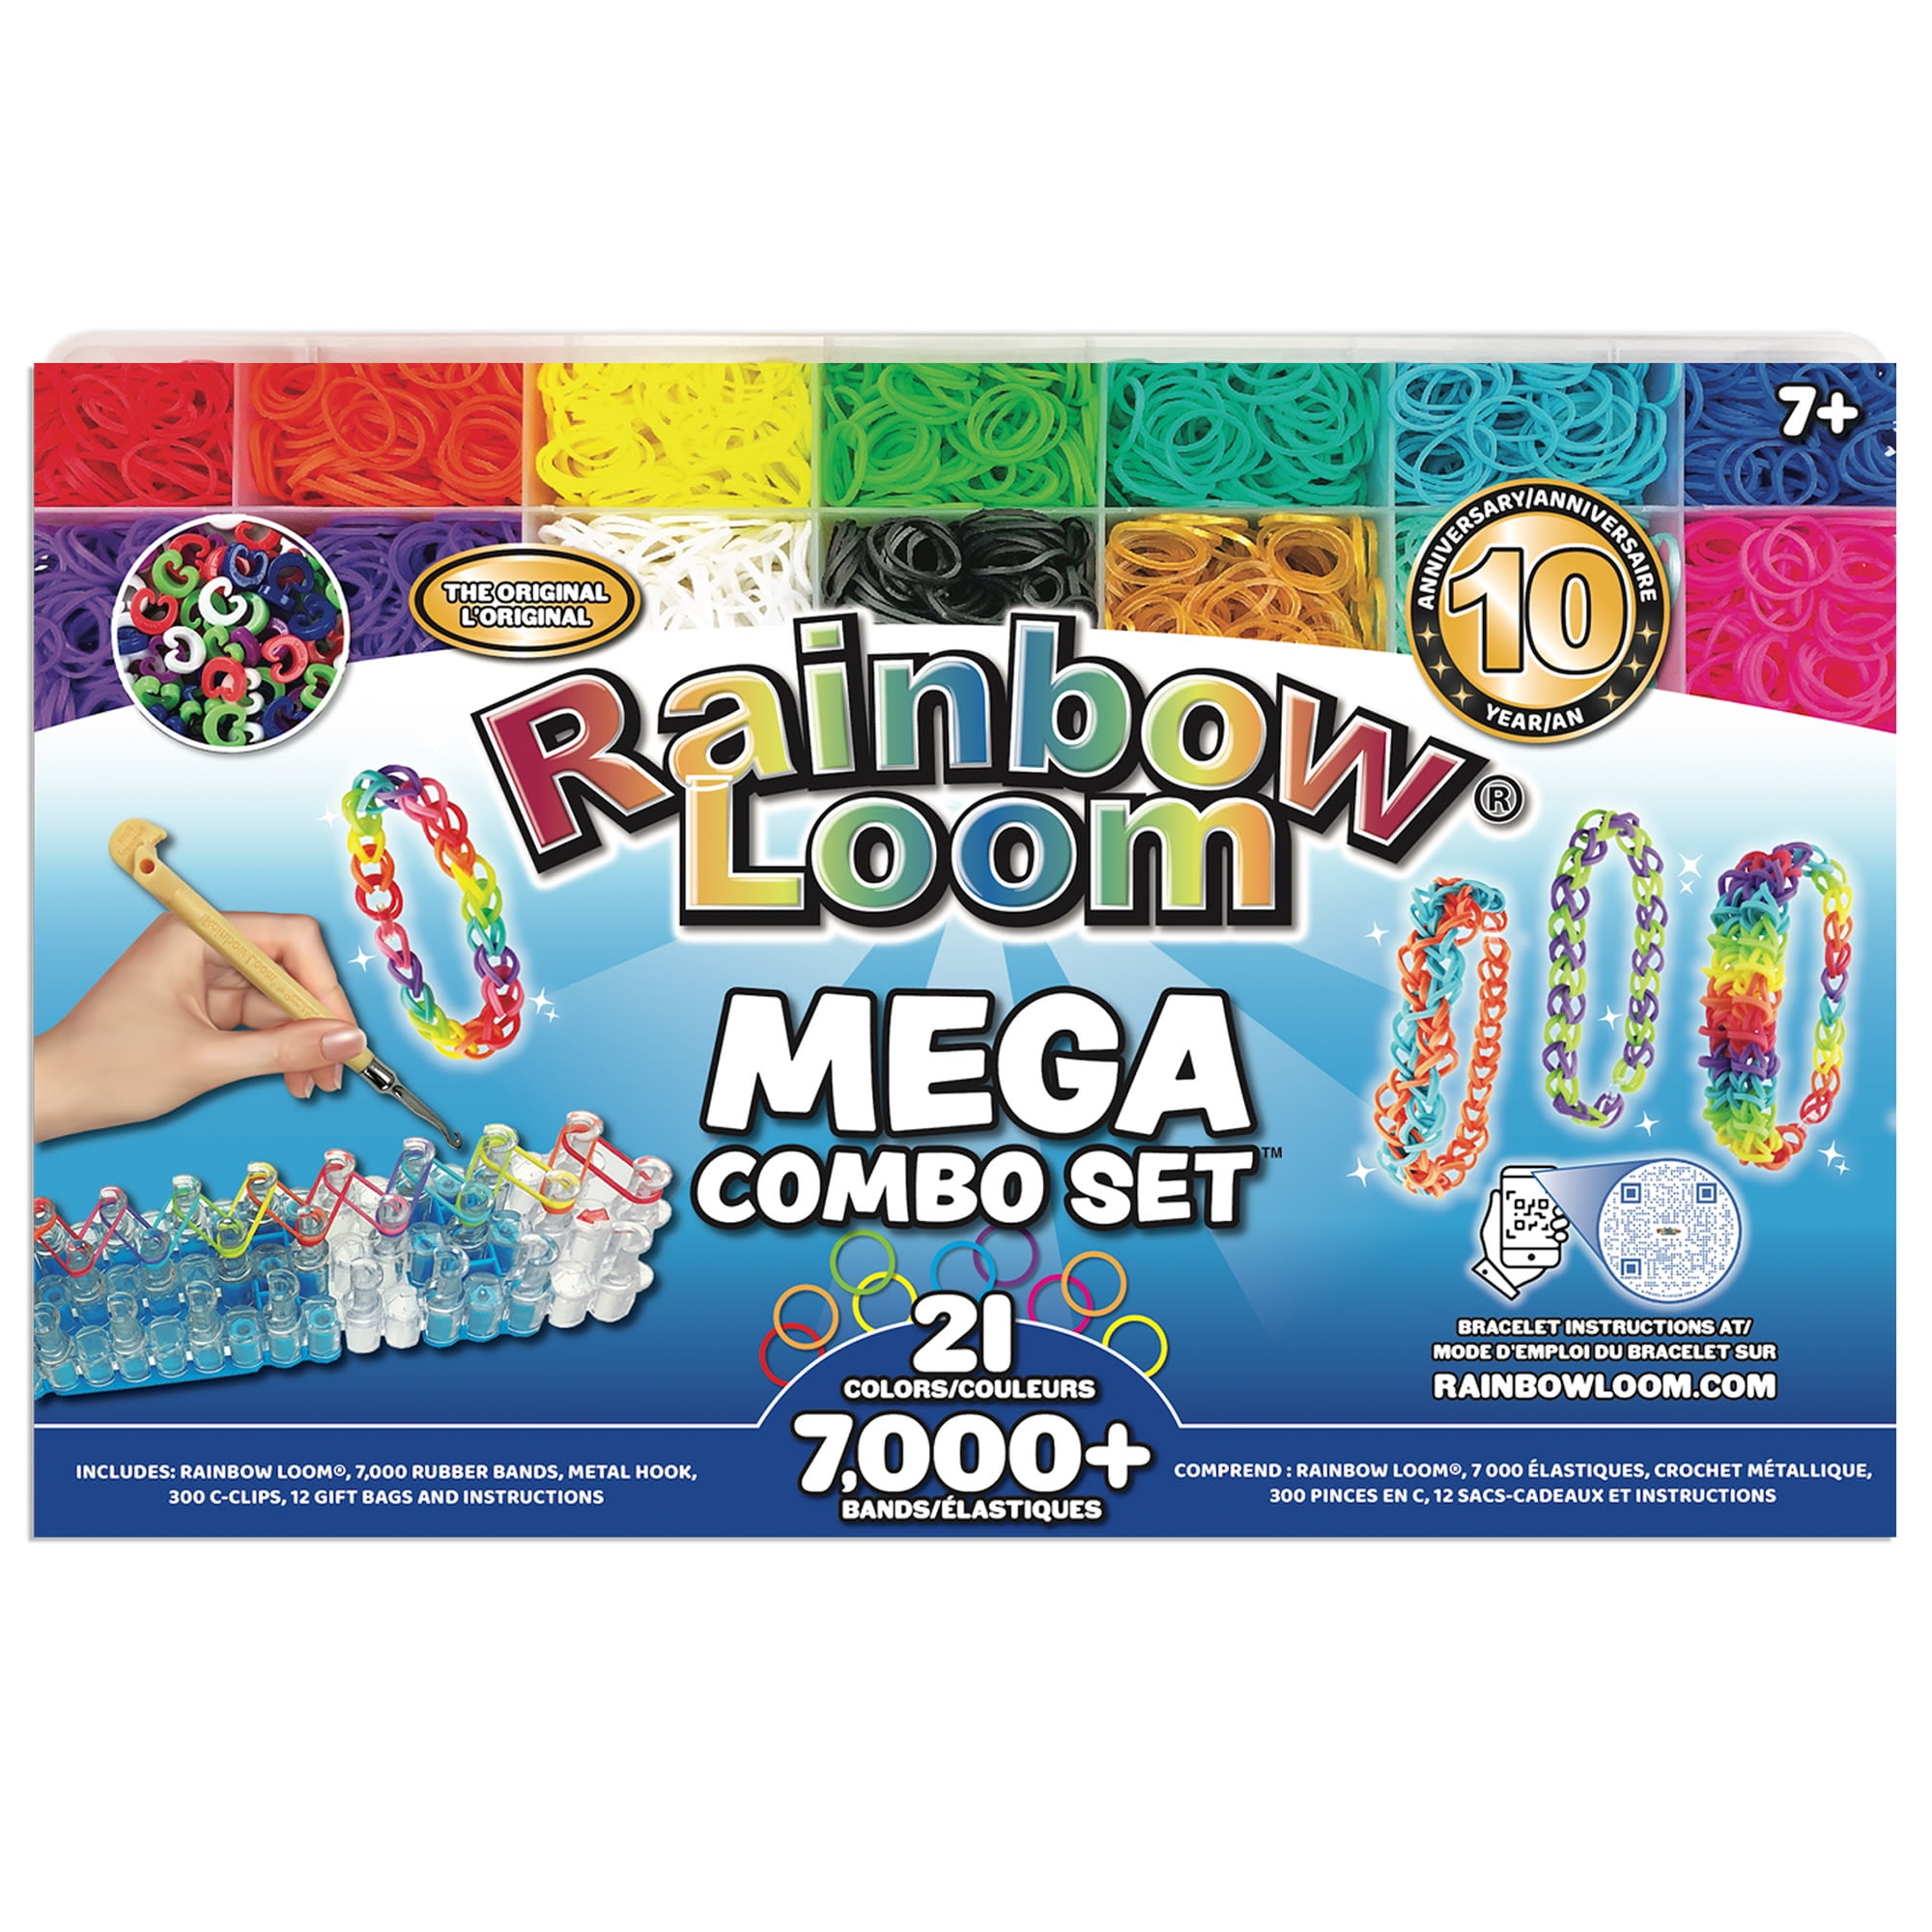 Amazon.com: Rainbow Loom® Combo Set, Features 4000+ Colorful Rubber Bands,  2 Step-by-Step Bracelet Instructions, Organizer Case, Great Gift for Kids  7+ to Promote Fine Motor Skills : Toys & Games